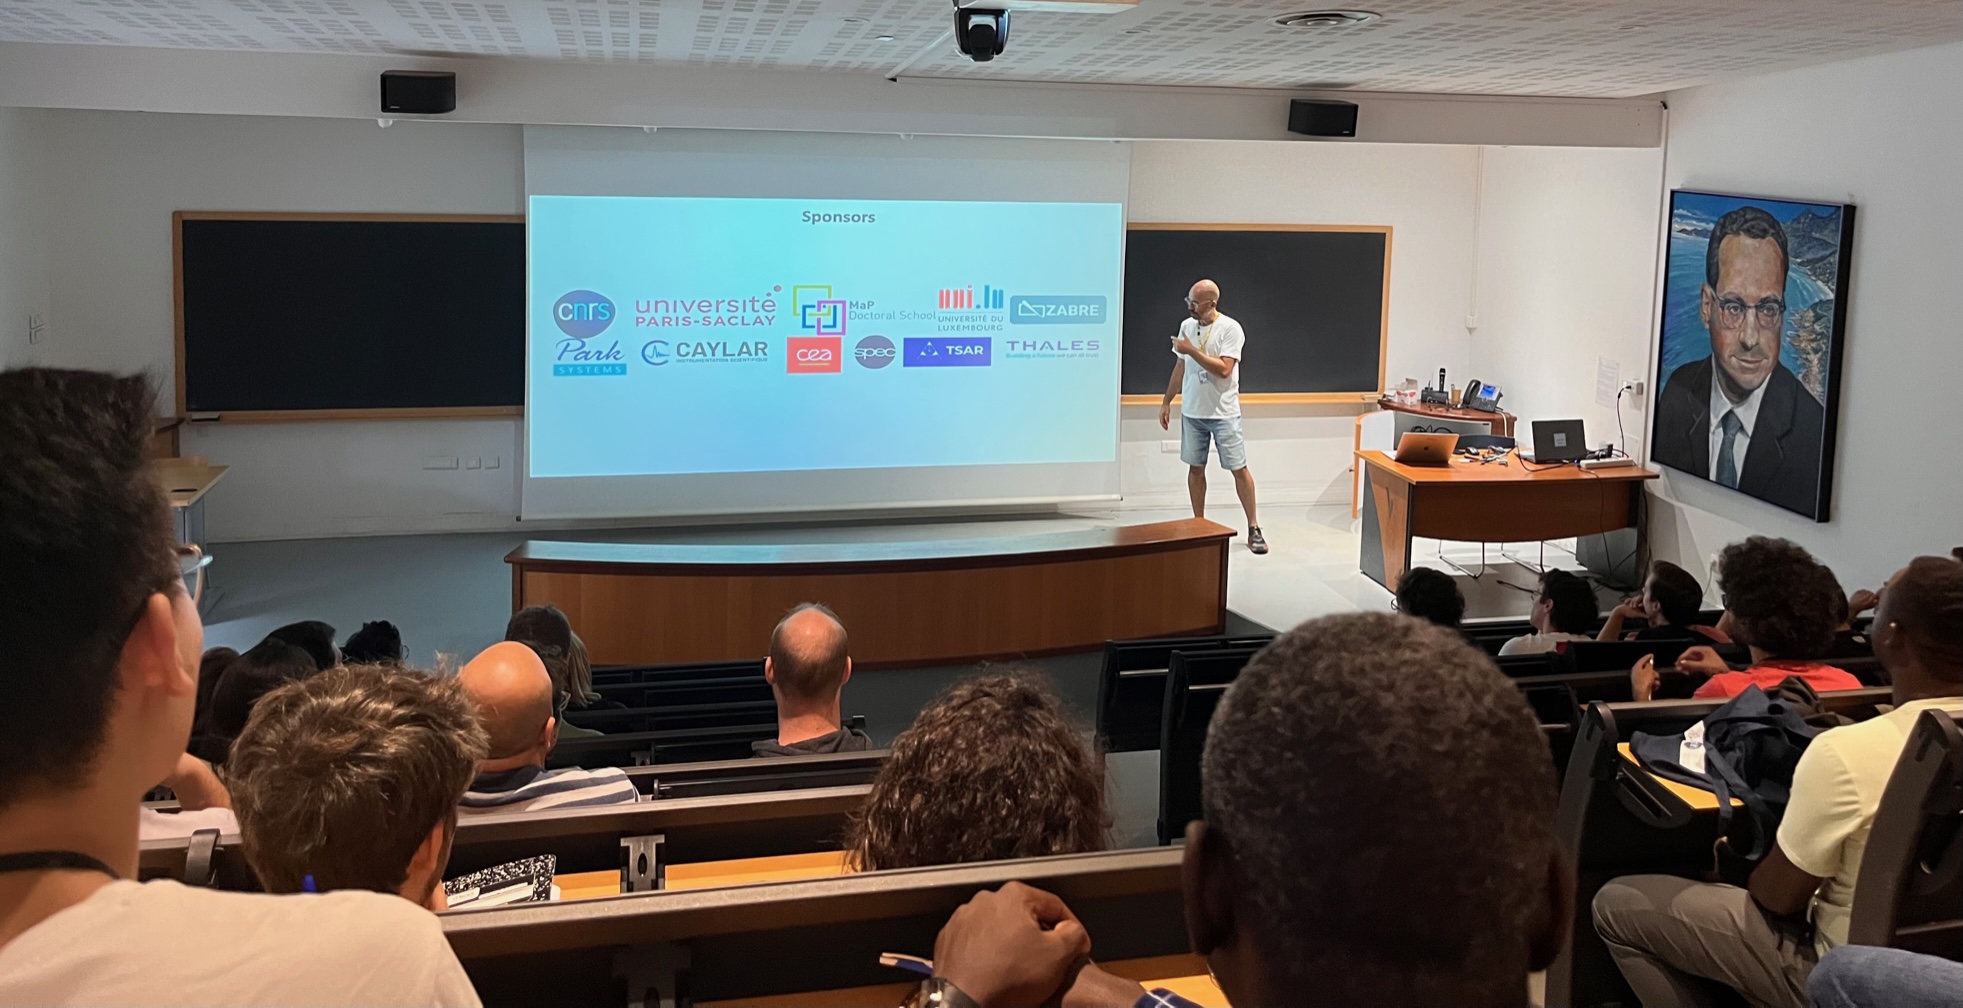 A person holding a lecture in a lecture hall. On the screen several sponsor logos.